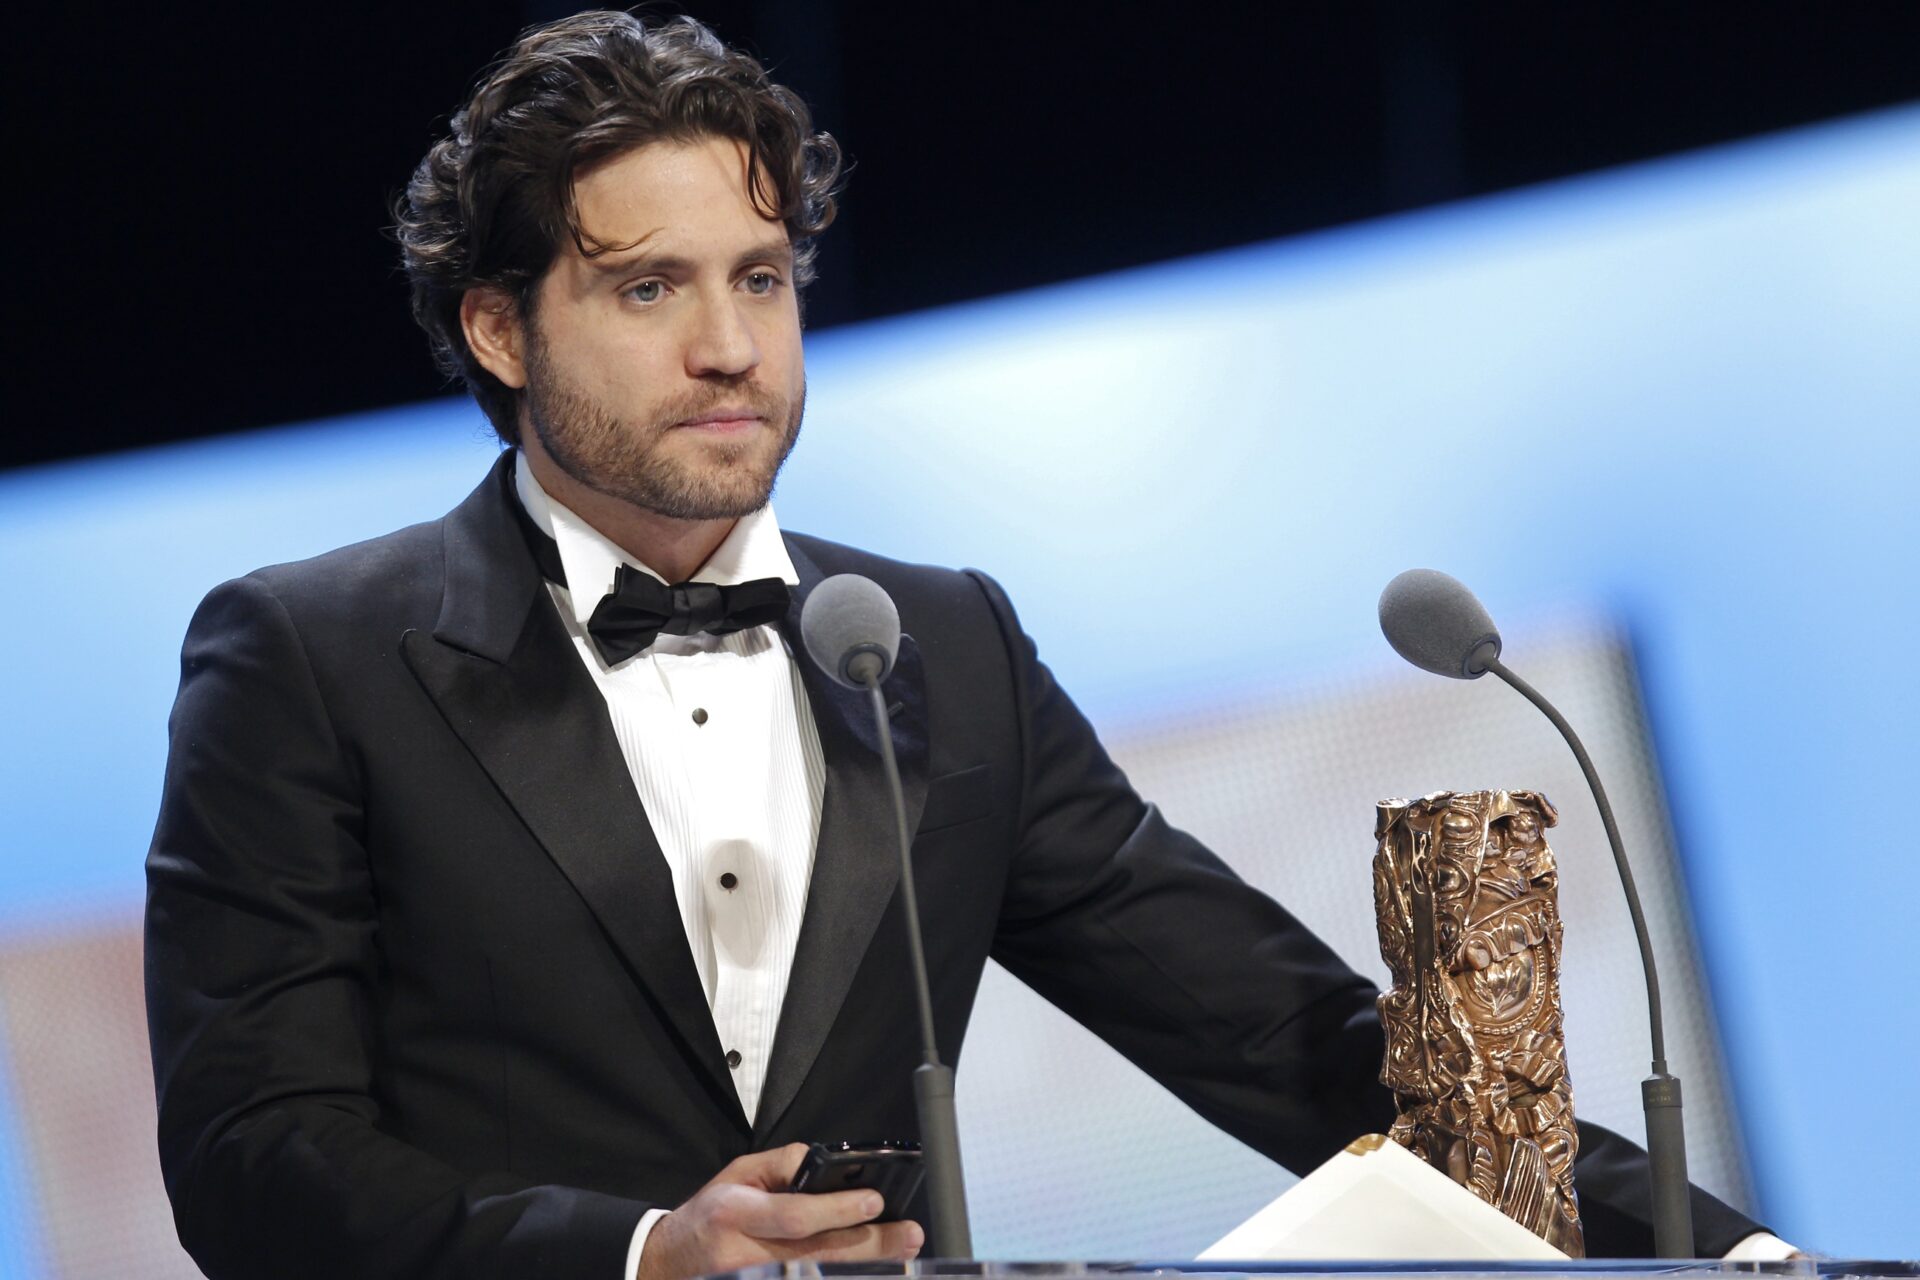 Venezuelan actor Edgar Ramirez stands with his trophy after winning the Best Newcomer award for French director Olivier Assayas' film "Carlos" during the 36th Cesar Awards ceremony in Paris February 25, 2011. REUTERS/Benoit Tessier (FRANCE - Tags: ENTERTAINMENT) FRANCE-AWARDS/